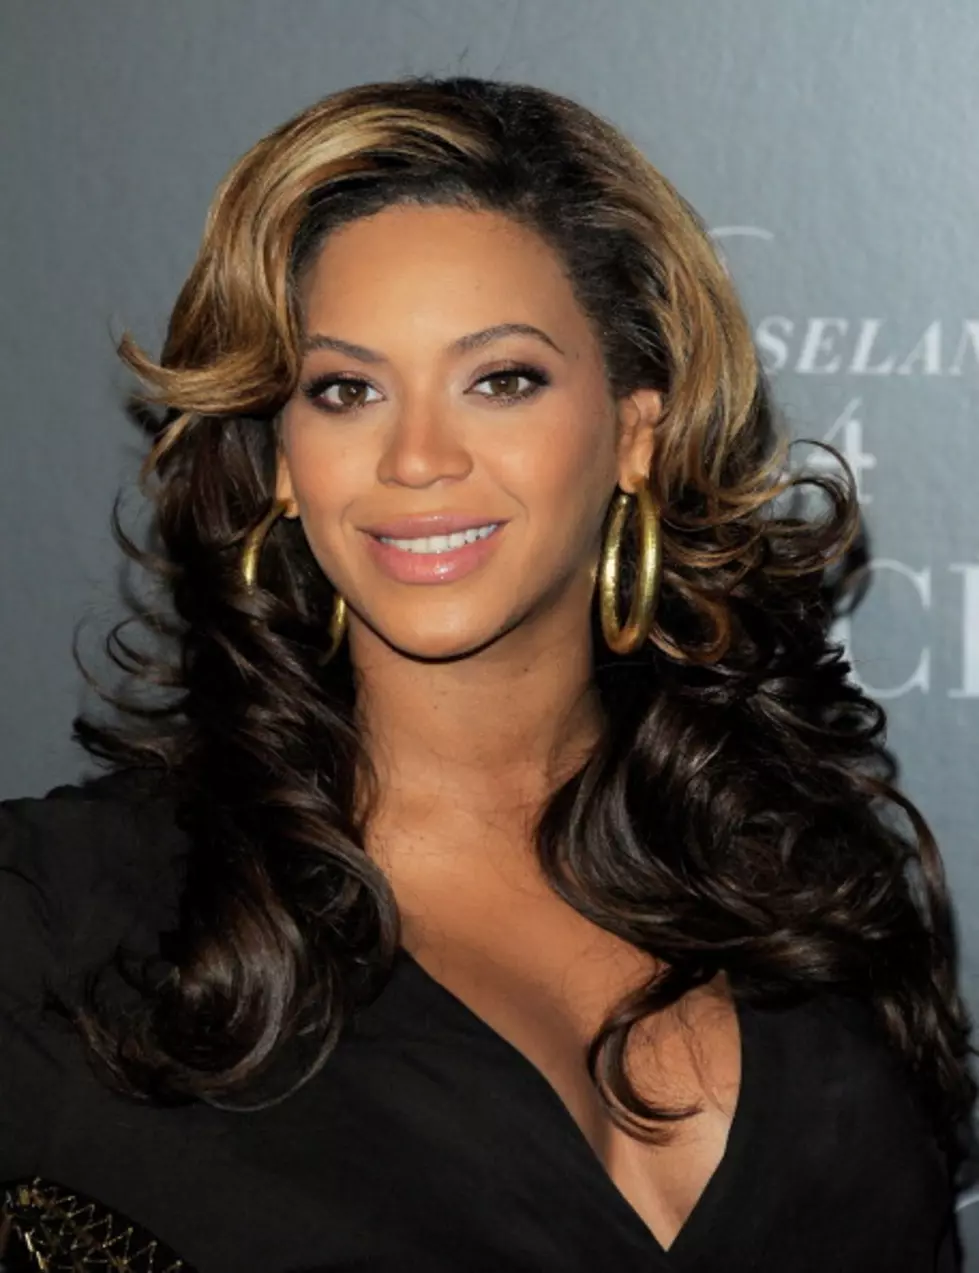 Beyonce Most Beautiful, Lindsay Fires Back At Rosie, Octomom Gets Away With Murder